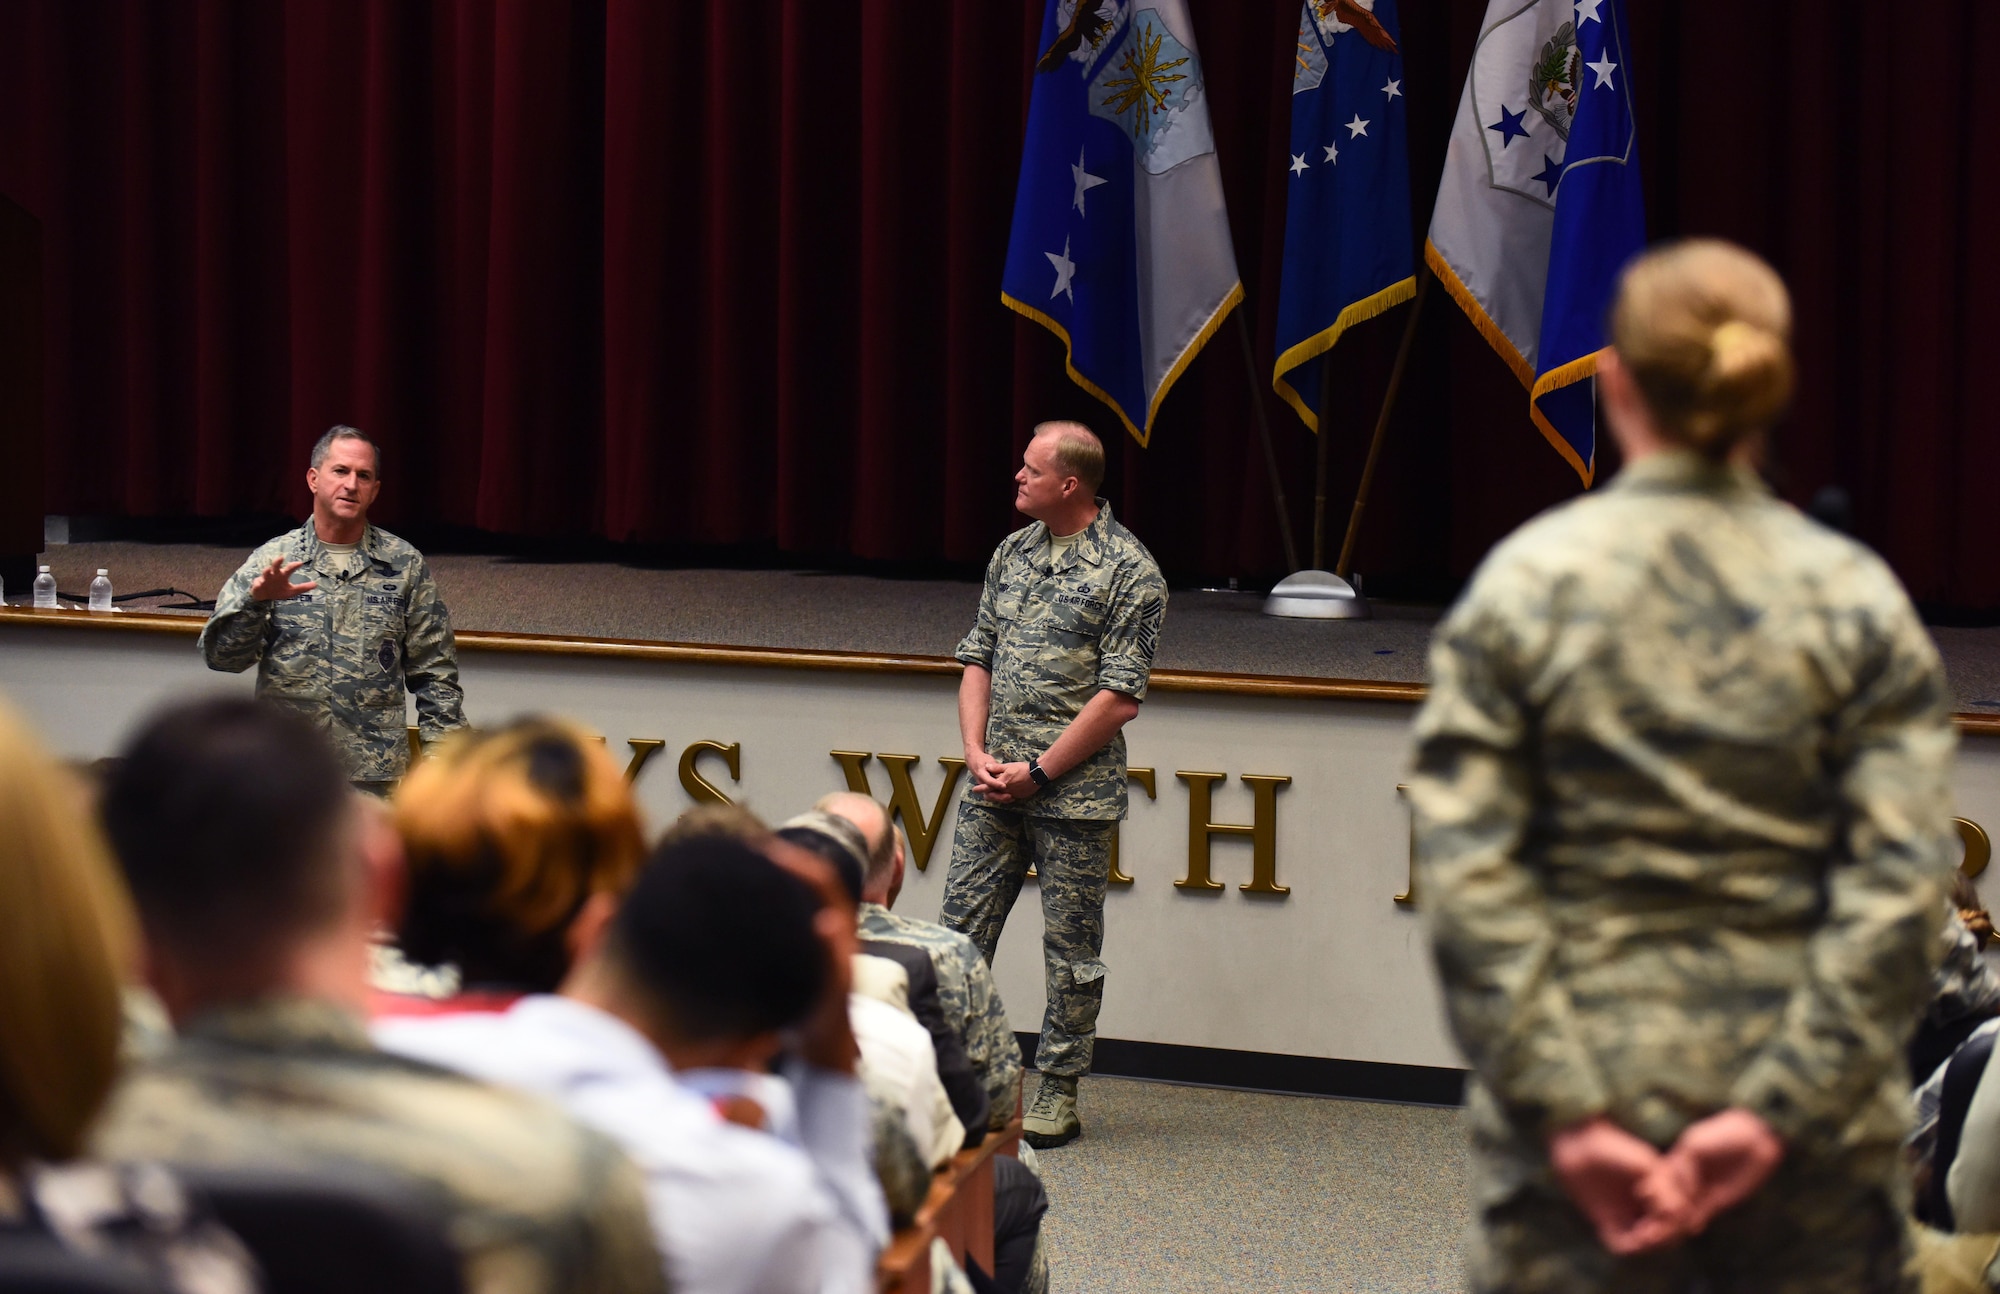 An Airman from Maxwell Air Force Base, Ala., asks Air Force Chief of Staff Gen. David L. Goldfein and Chief Master Sgt. of the Air Force James A. Cody a question during a town hall event July 20, 2016. The Air Force’s two most senior leaders answered multiple questions from the audience, addressing the Airmen’s concerns. (U.S. Air Force photo/Senior Airman Hailey Haux)